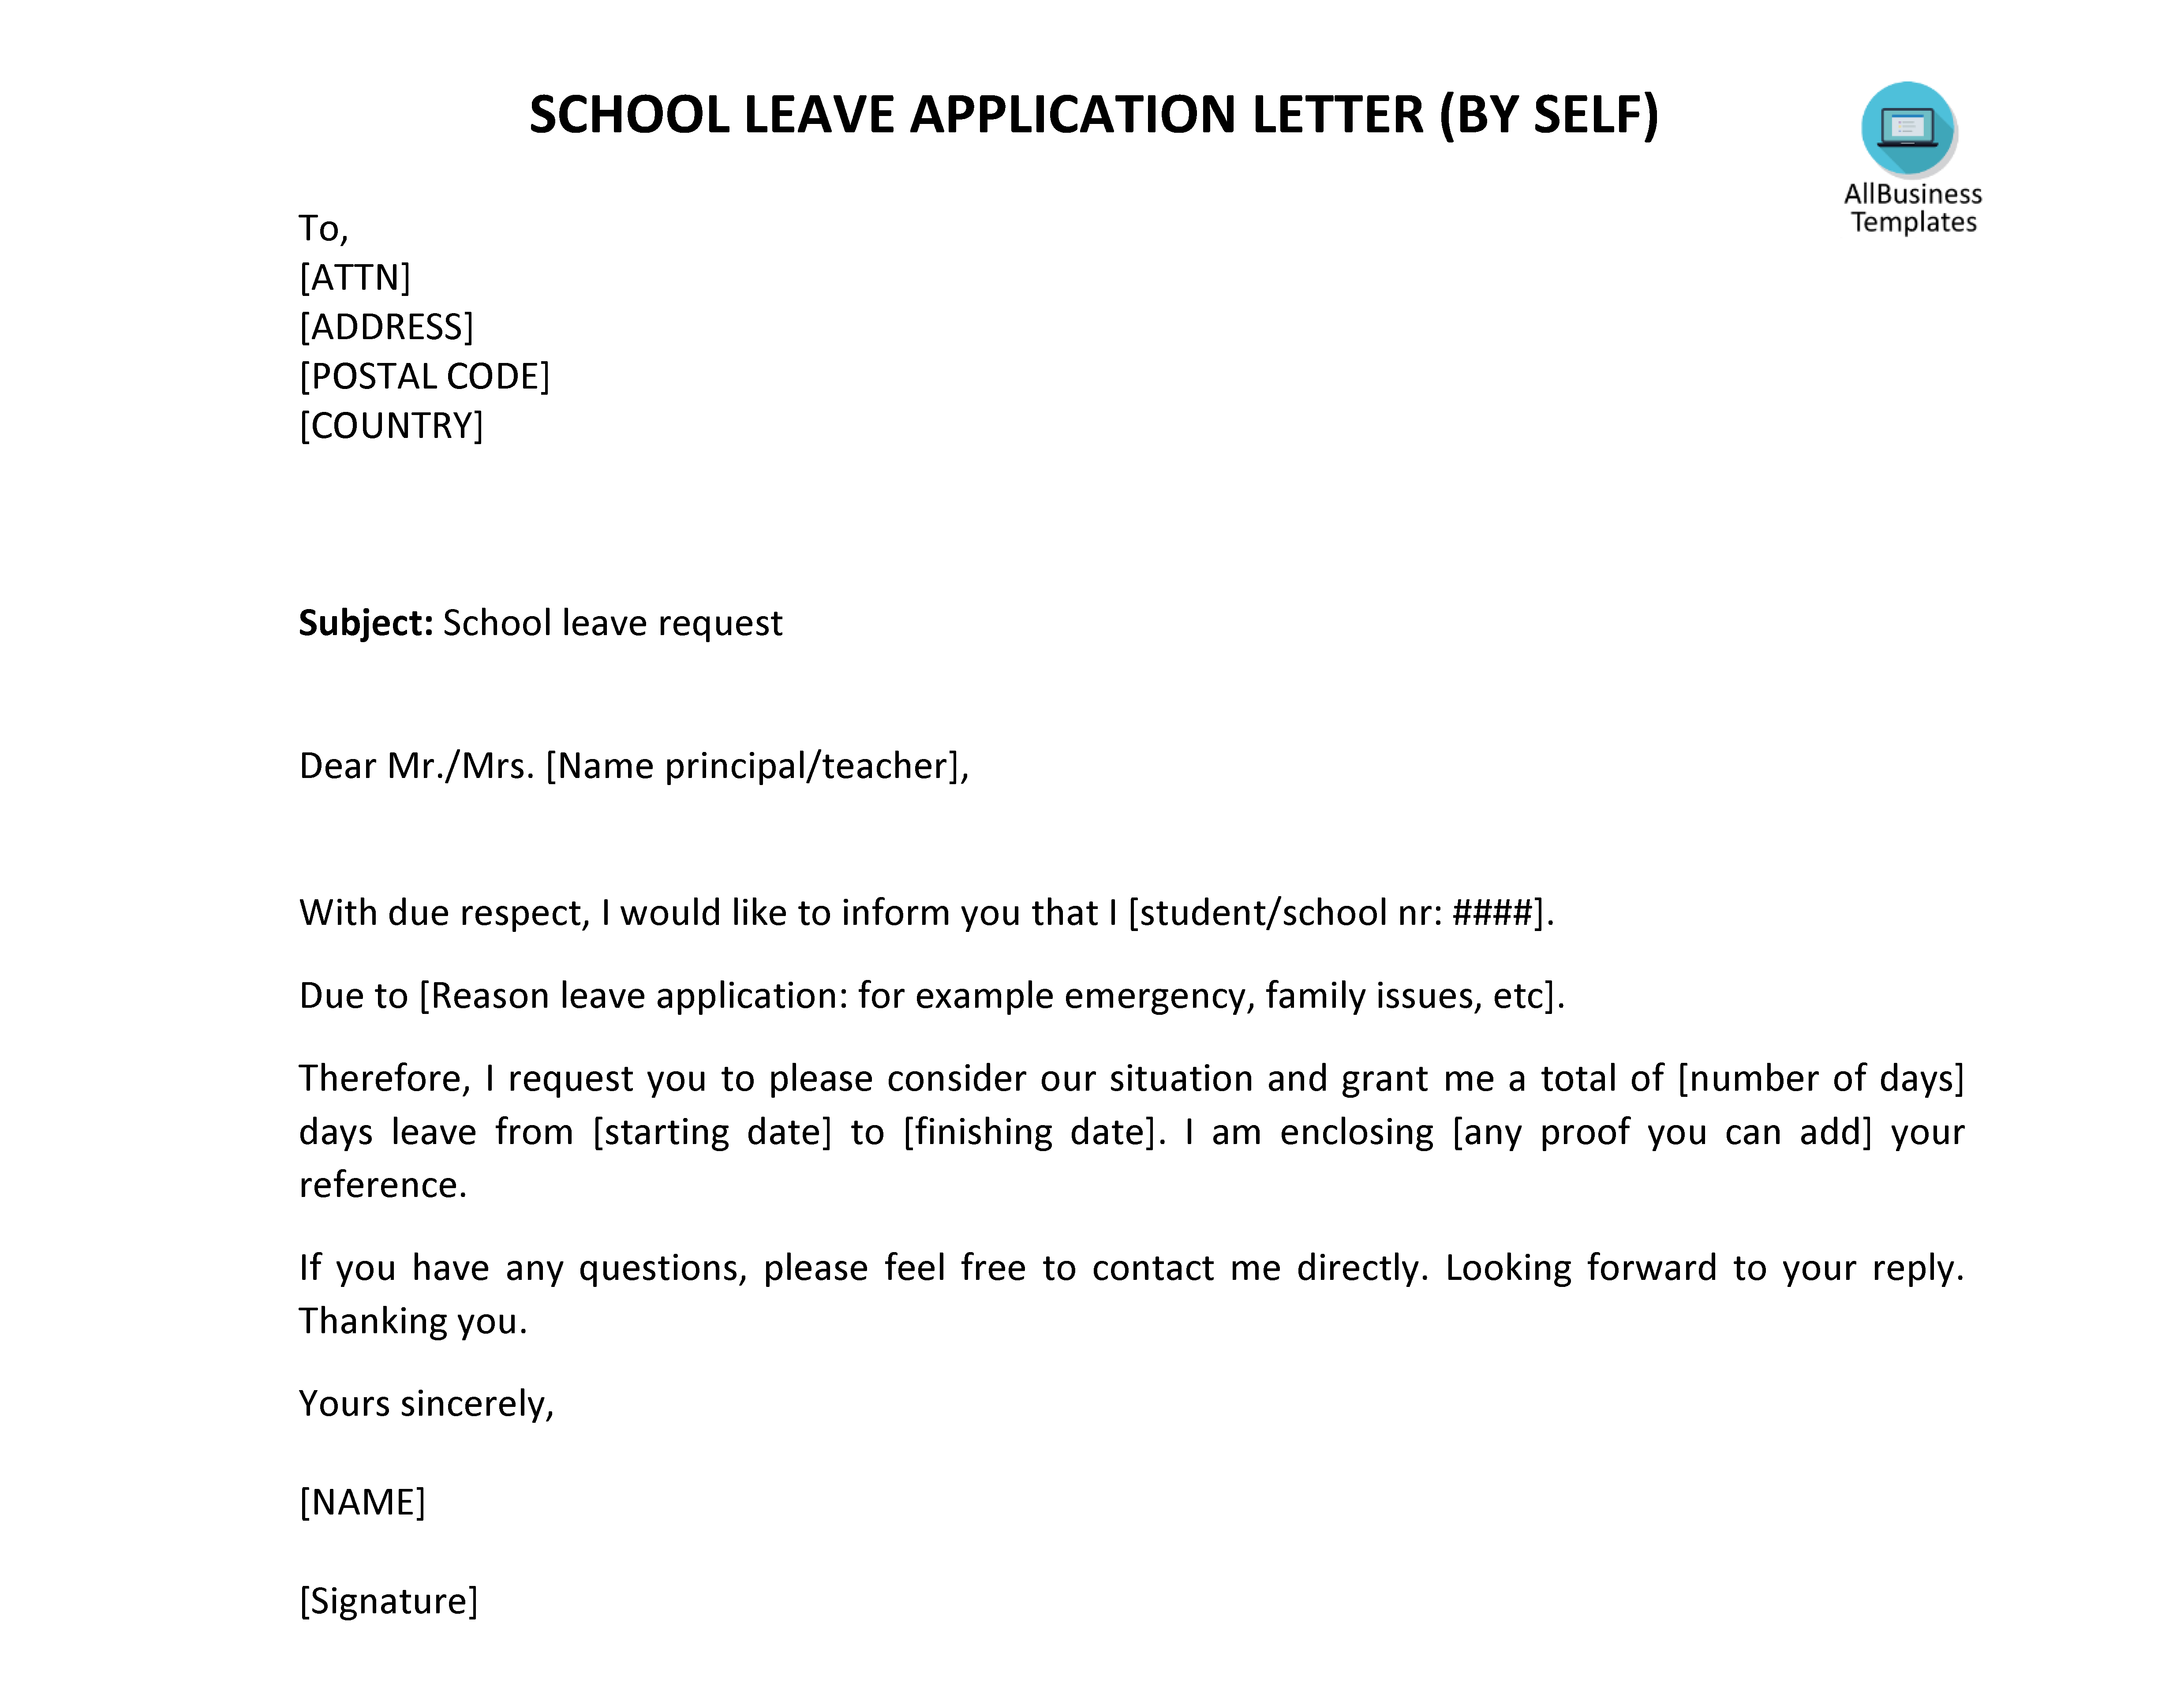 school leave letter by self template